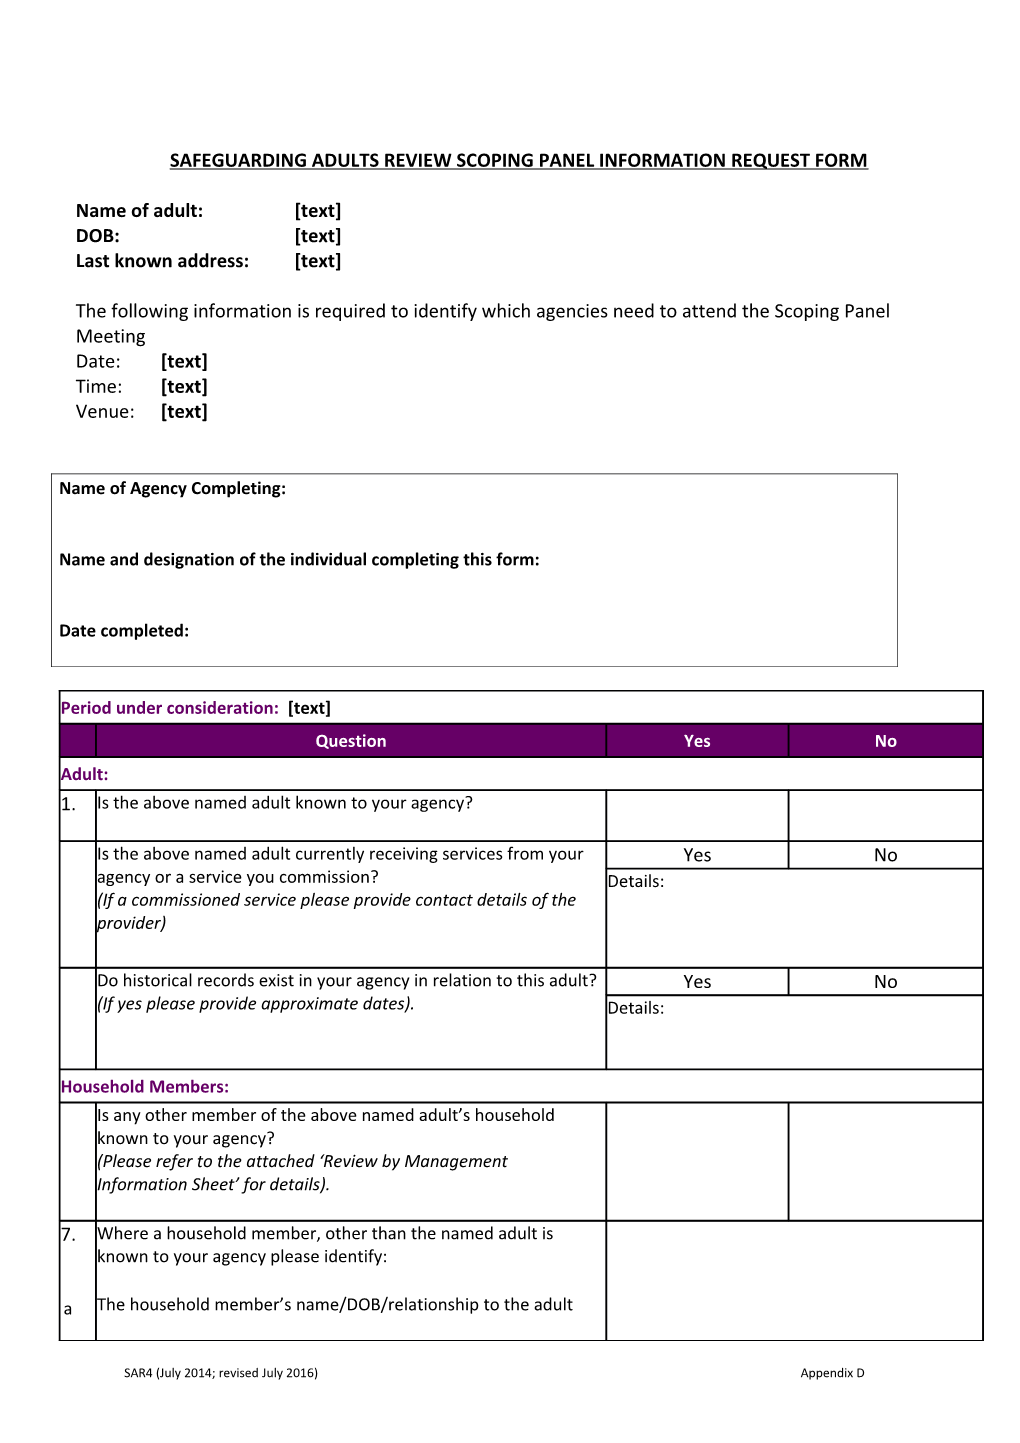 App D; SAR4 - Scoping Panel Information Request Form (July 2016)